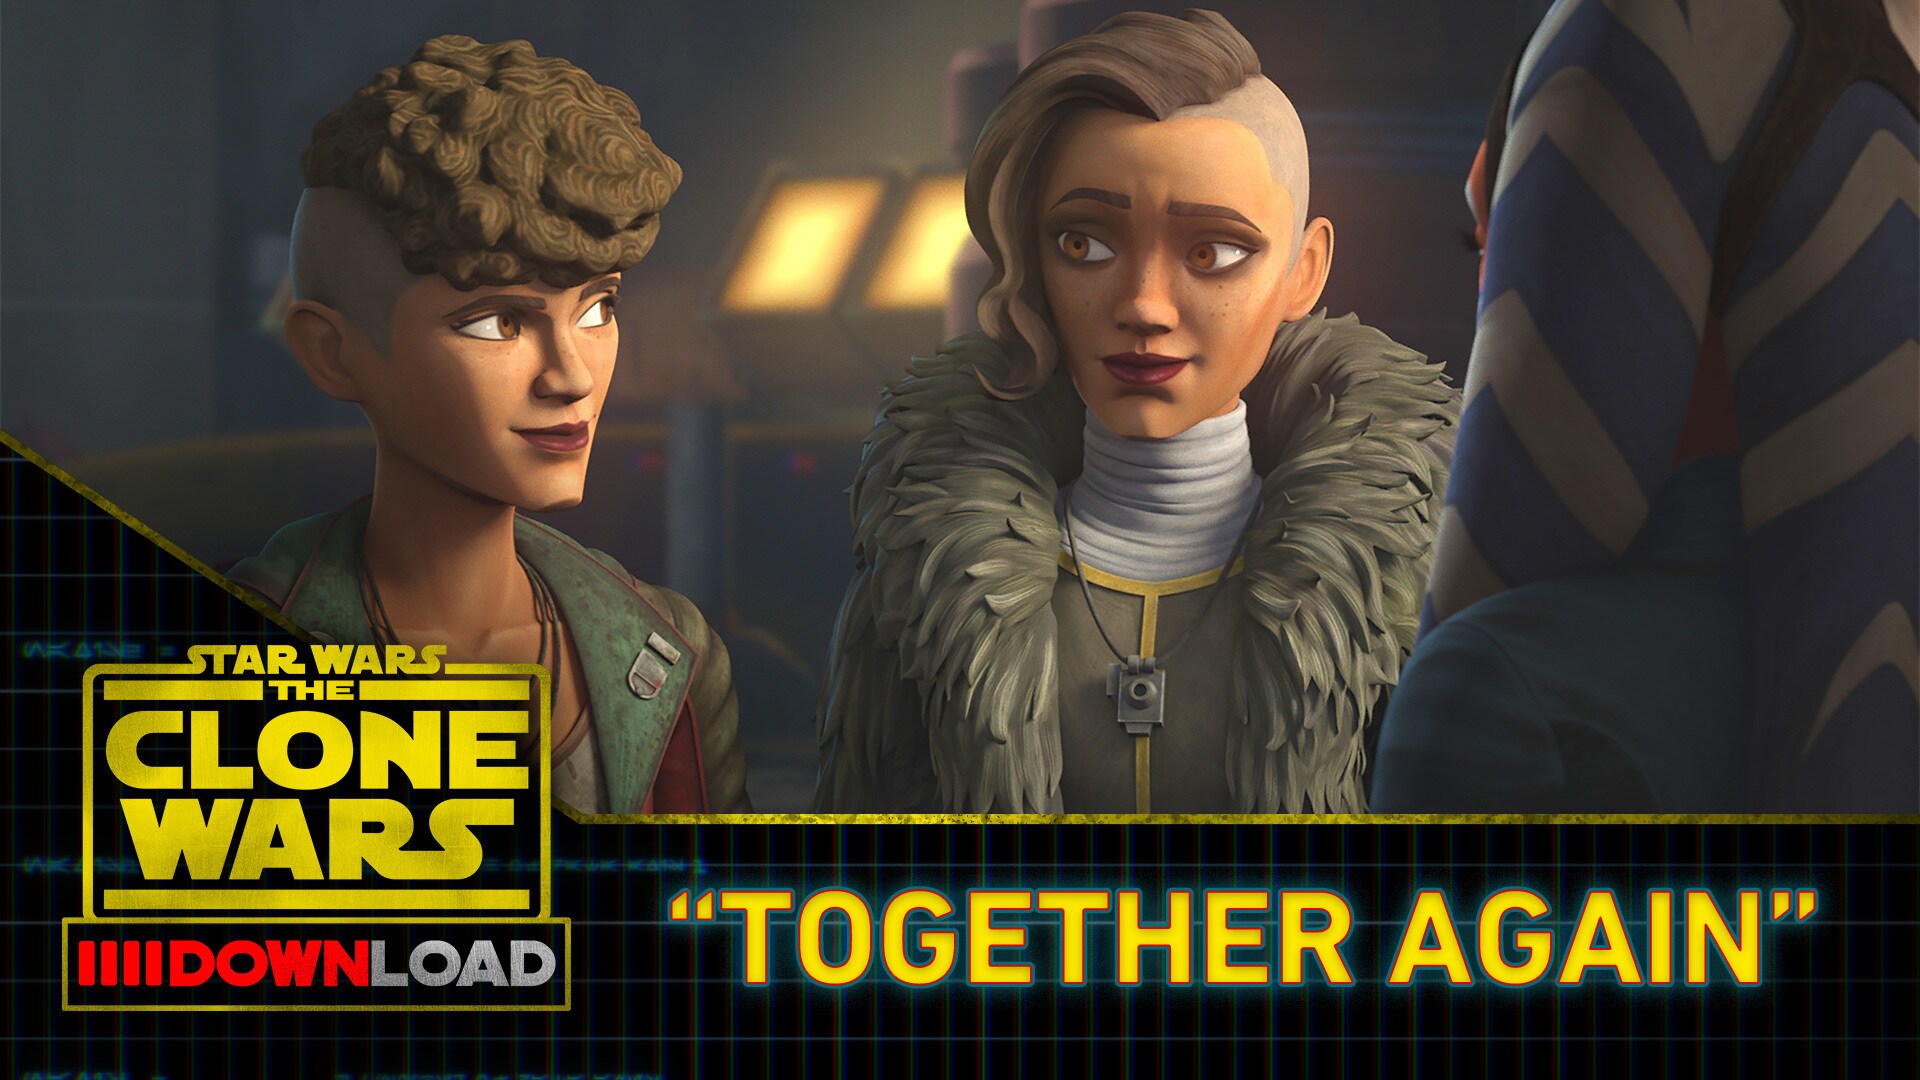 Clone Wars Download: "Together Again"